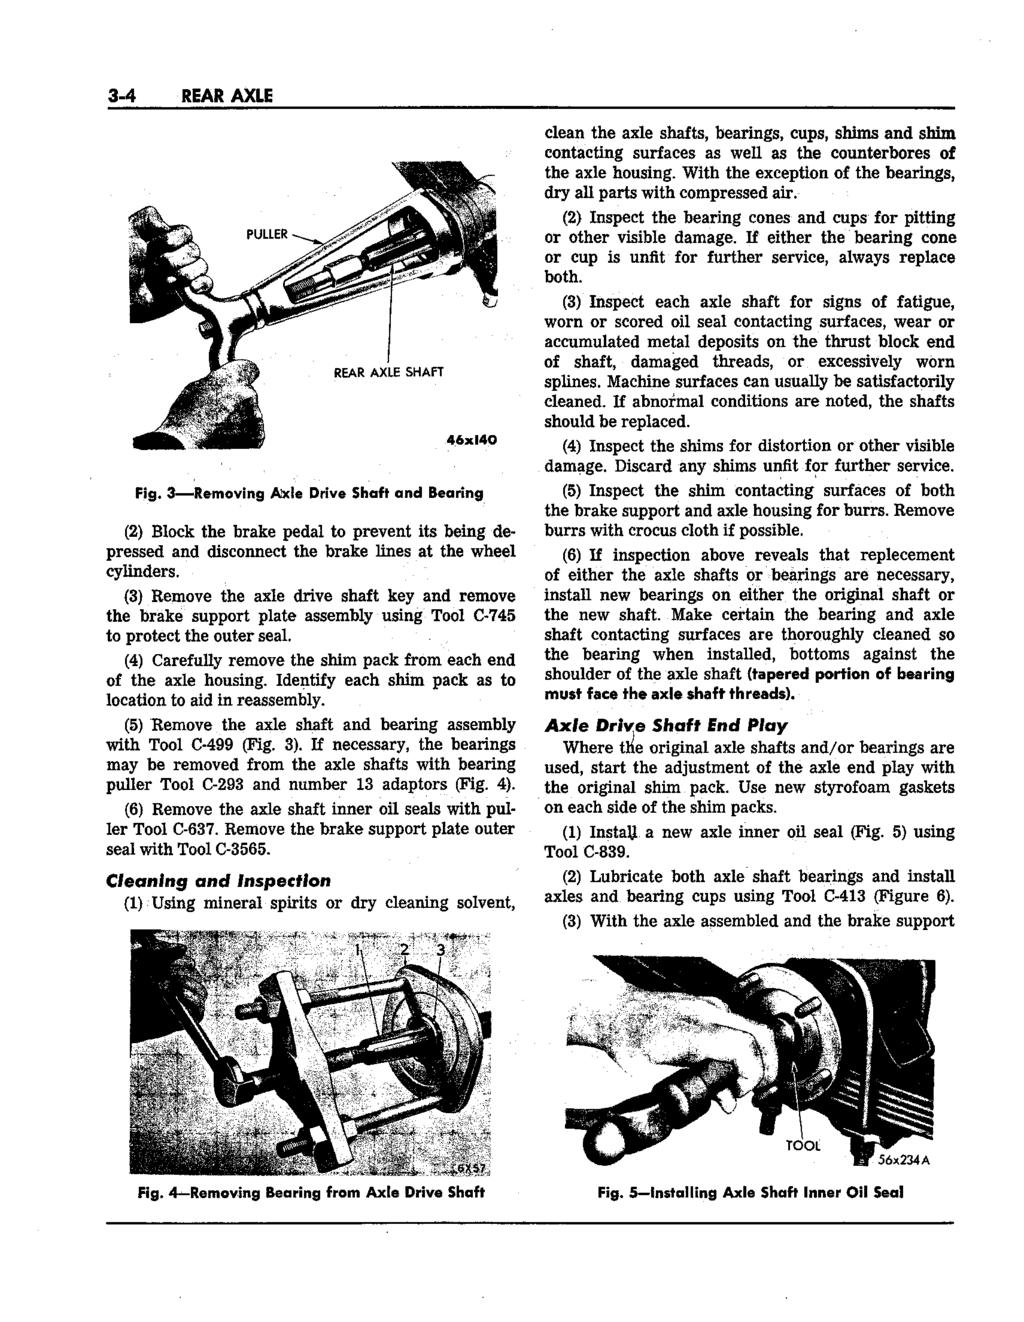 3-4 REAR AXLE Fig. 3 Removing Axle Drive Shaft and Hearing (2) Block the brake pedal to prevent its being depressed and disconnect the brake lines at the wheel cylinders.